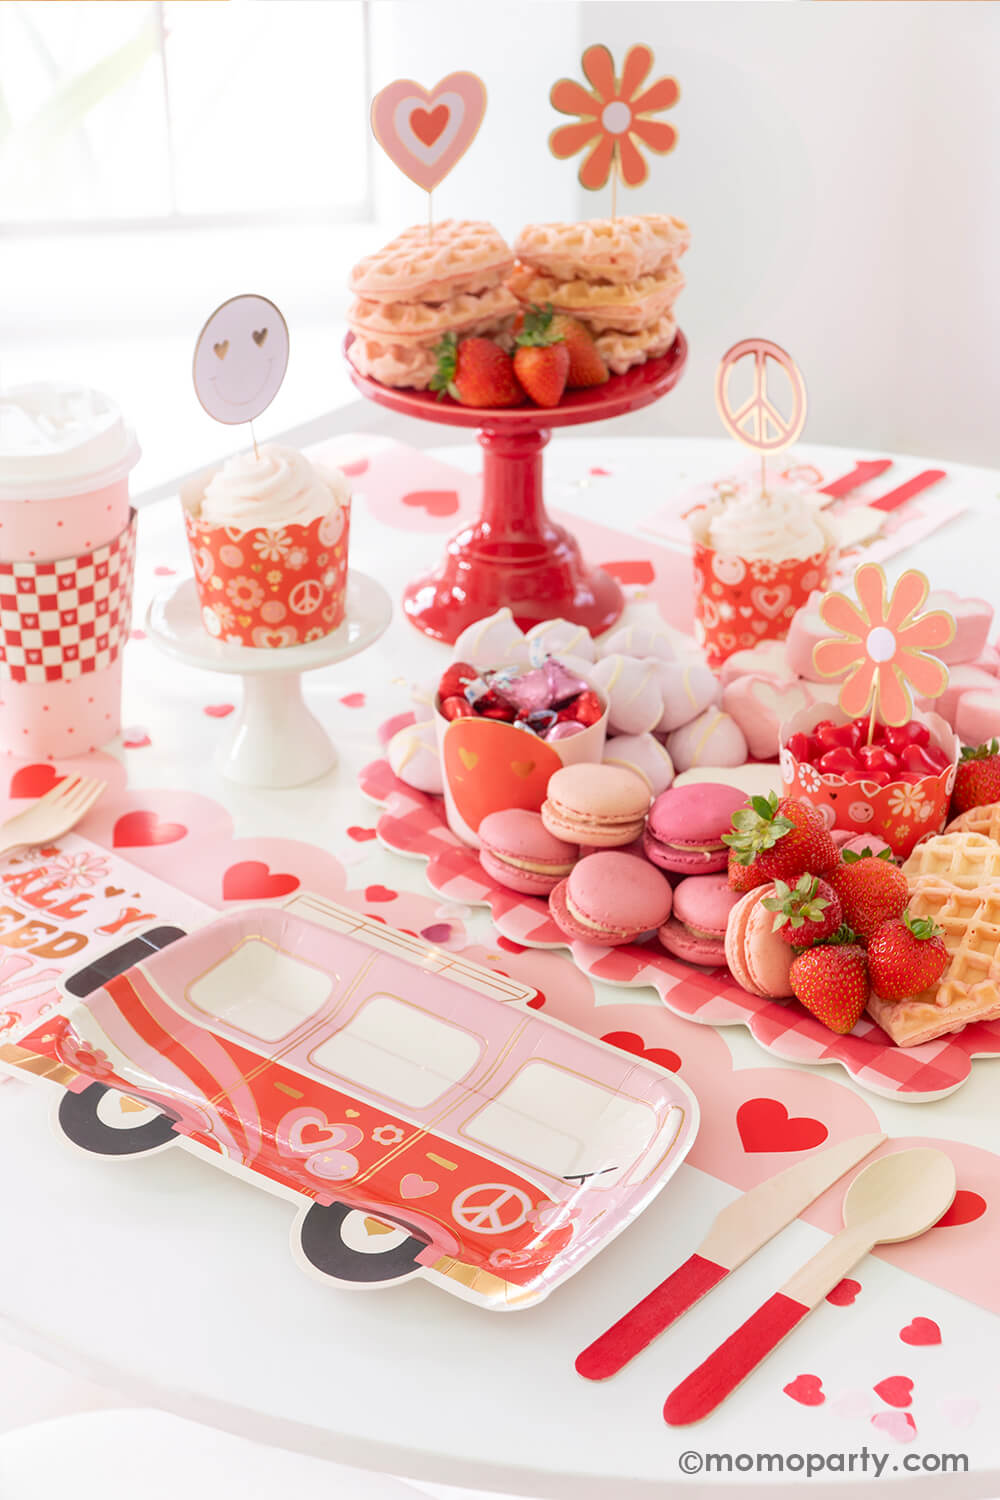 A party table featuring Momo Party's Groovy Valentine's party box with My Mind's Eye's retro Valentine's party supplies including a VW bus shaped plates, red checkered party cups, baking cup and topper set and "all you need is love" napkins. On the table there's a heart shaped sweet board filled with Valentine's Day themed treats including macarons, strawberries, heart shaped marshmallows, heart shaped pink waffles and candies, a perfect inspo for a fun Valentine's celebration!